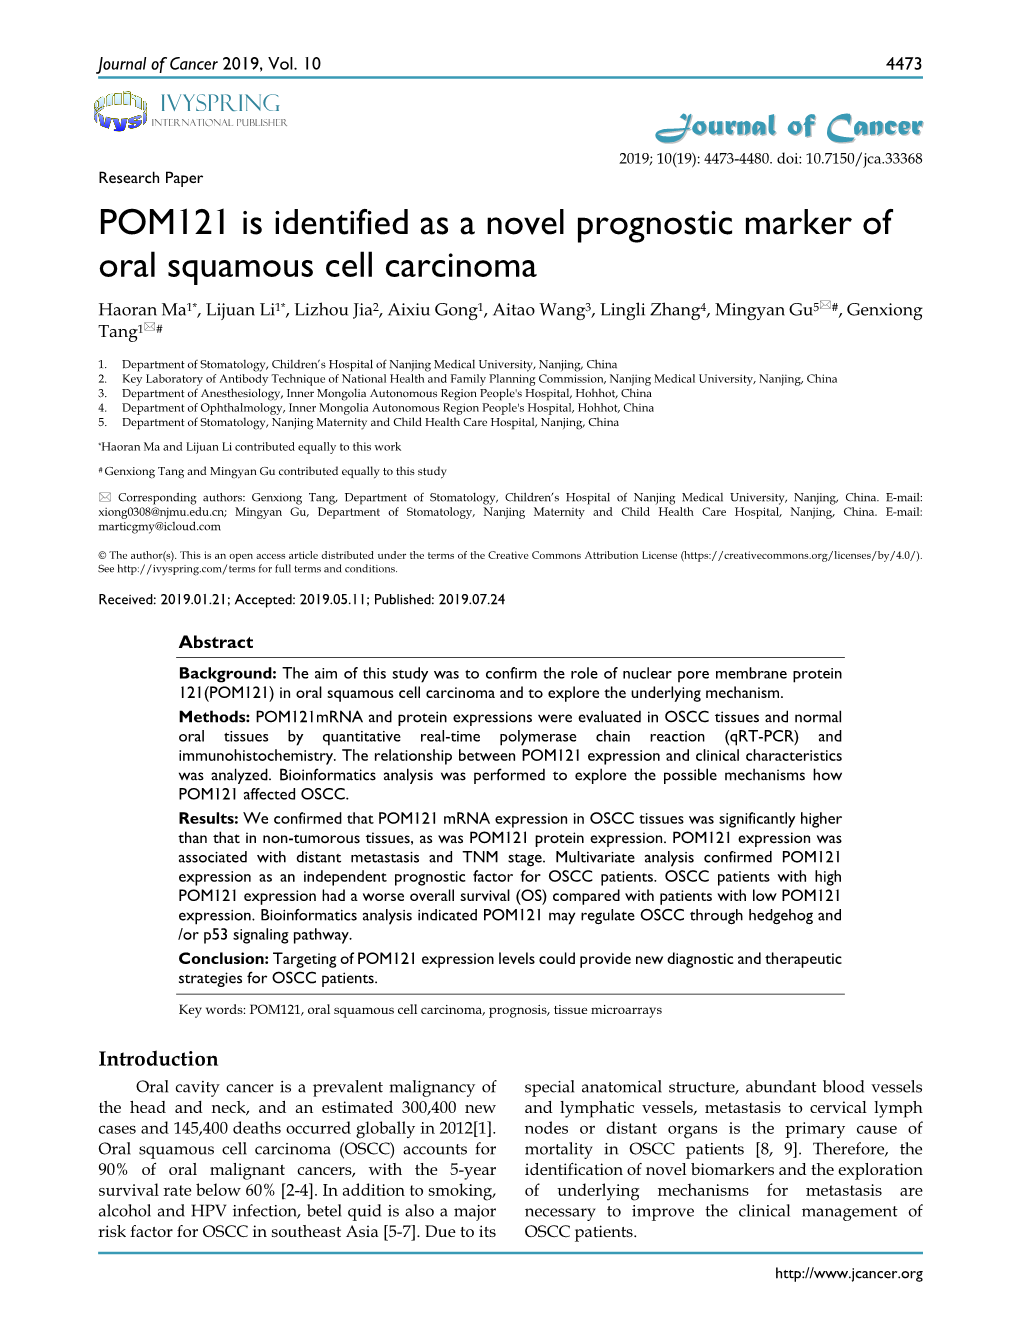 POM121 Is Identified As a Novel Prognostic Marker of Oral Squamous